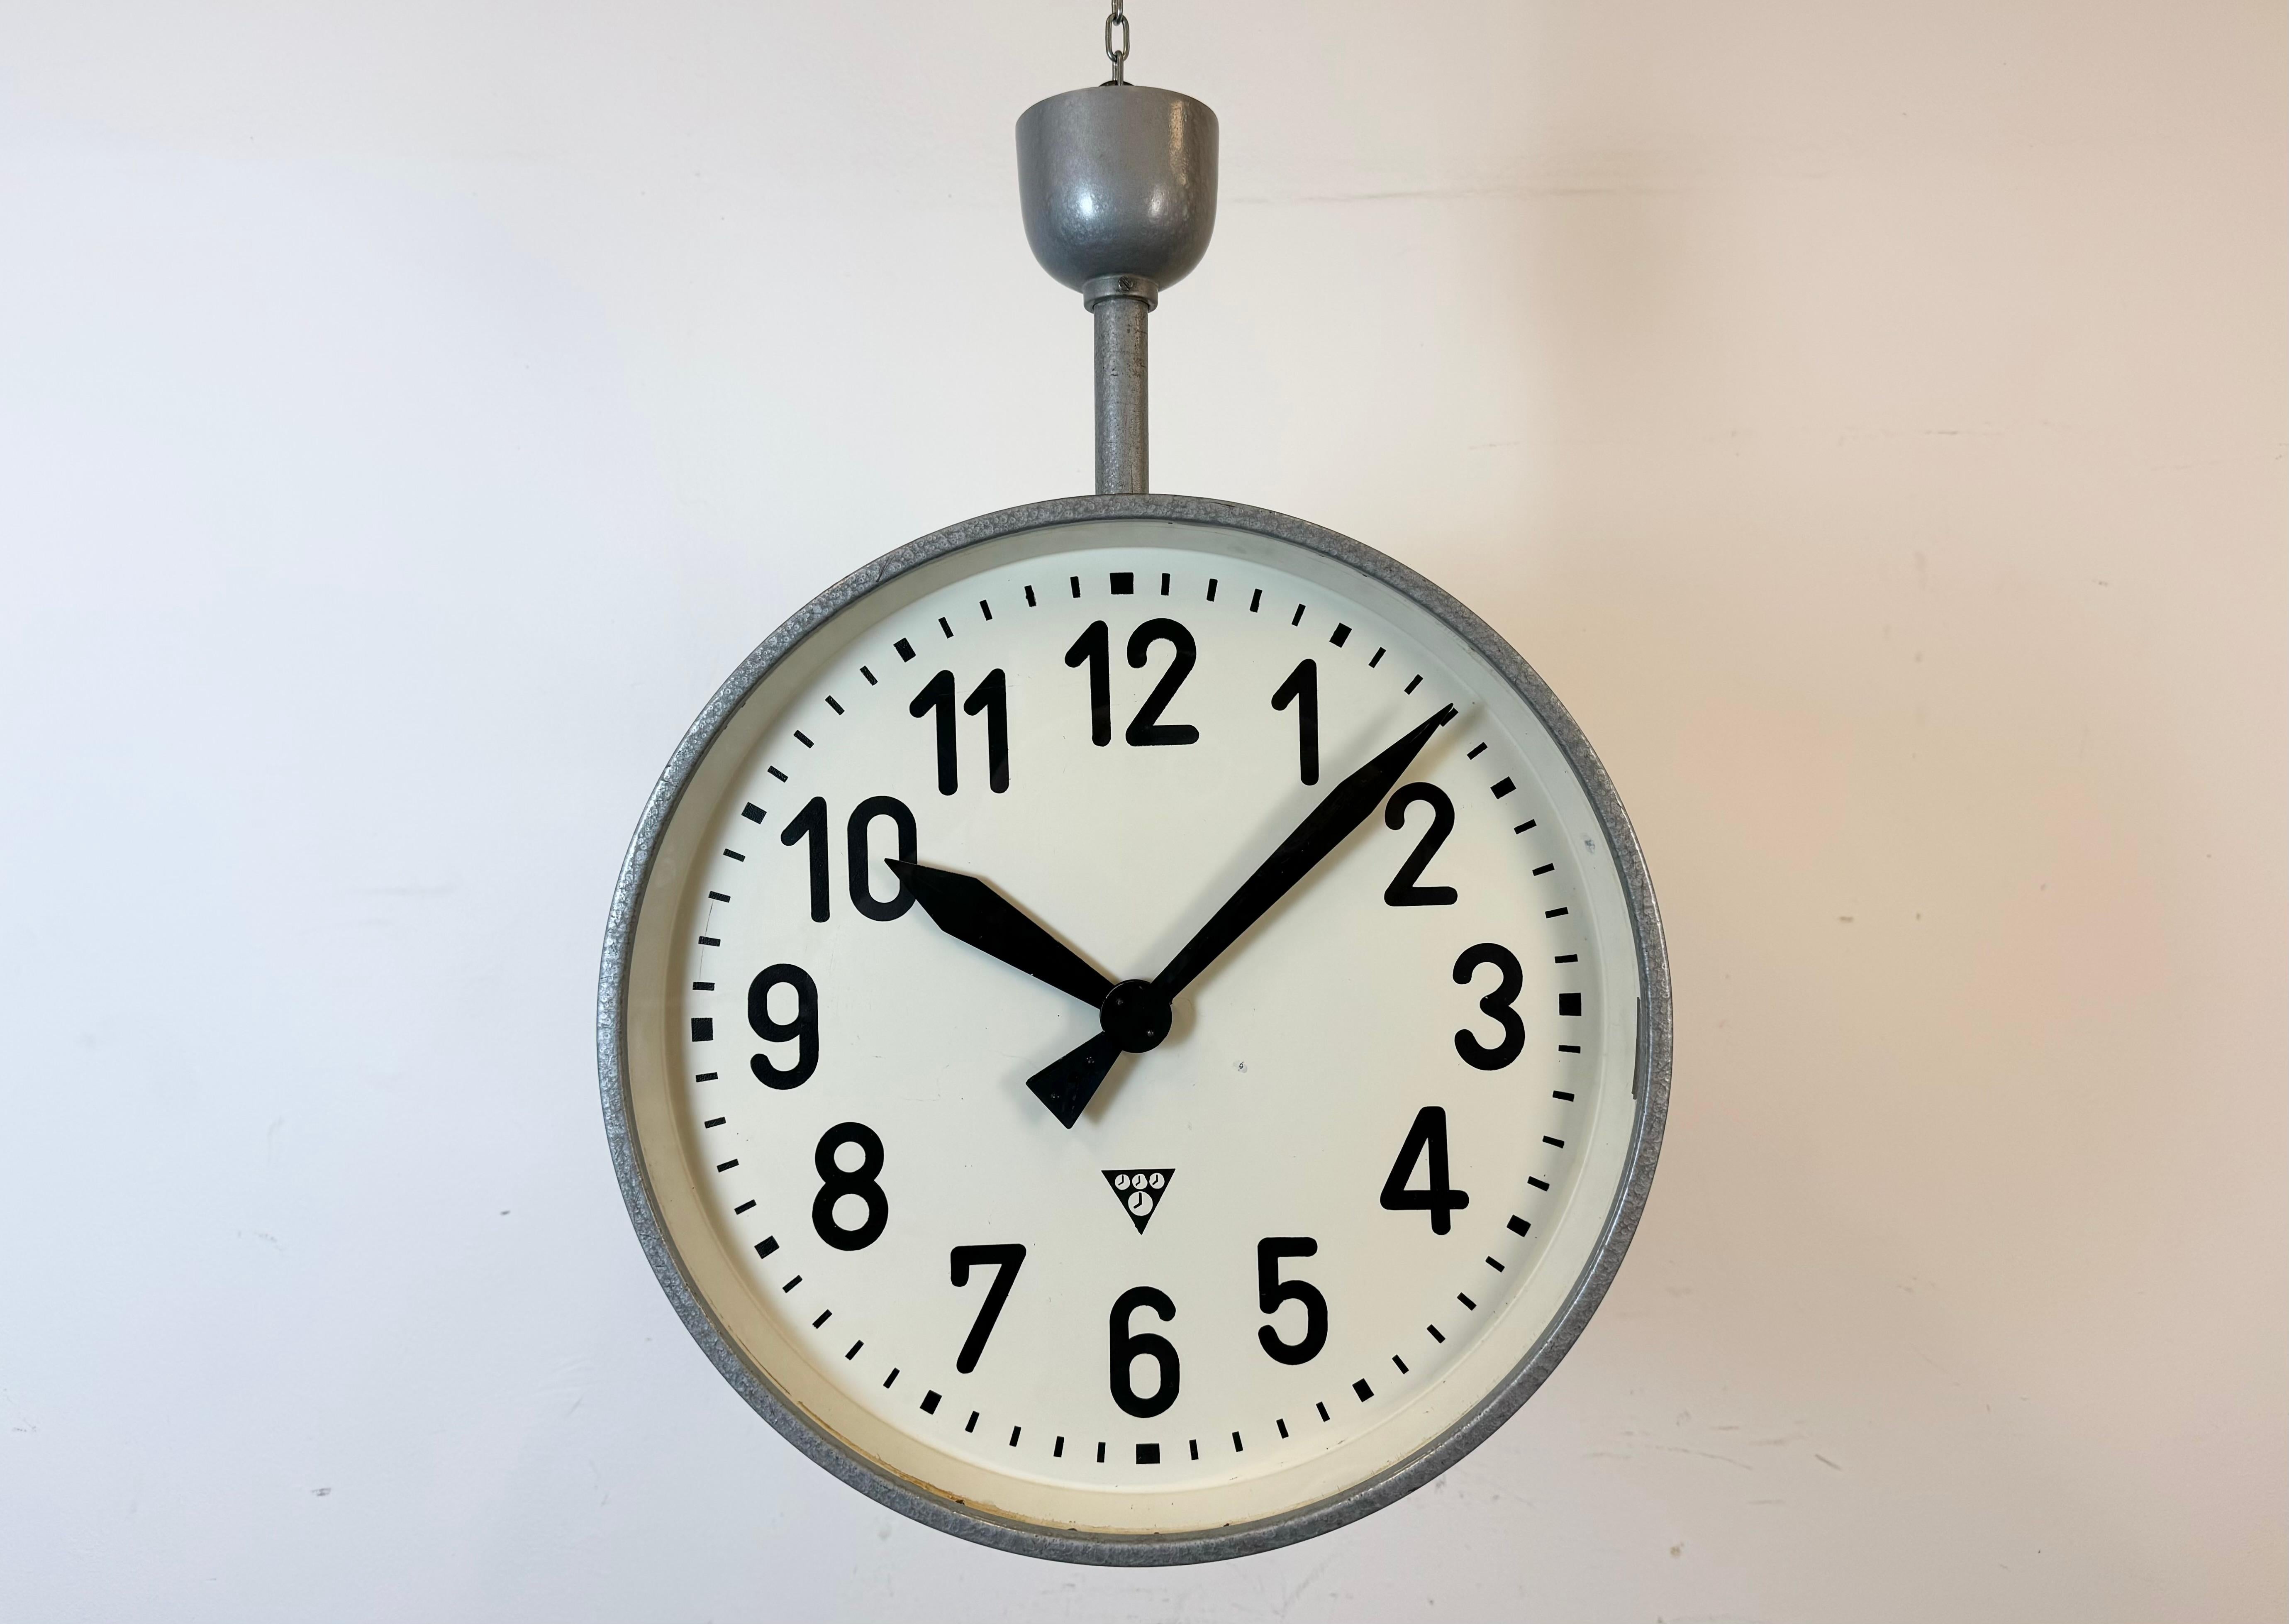 This large double sided railway or factory clock was produced by Pragotron, in former Czechoslovakia, during the 1950s. The piece features a grey hammer paint metal body and a clear glass cover. The clock has been converted into a battery-powered